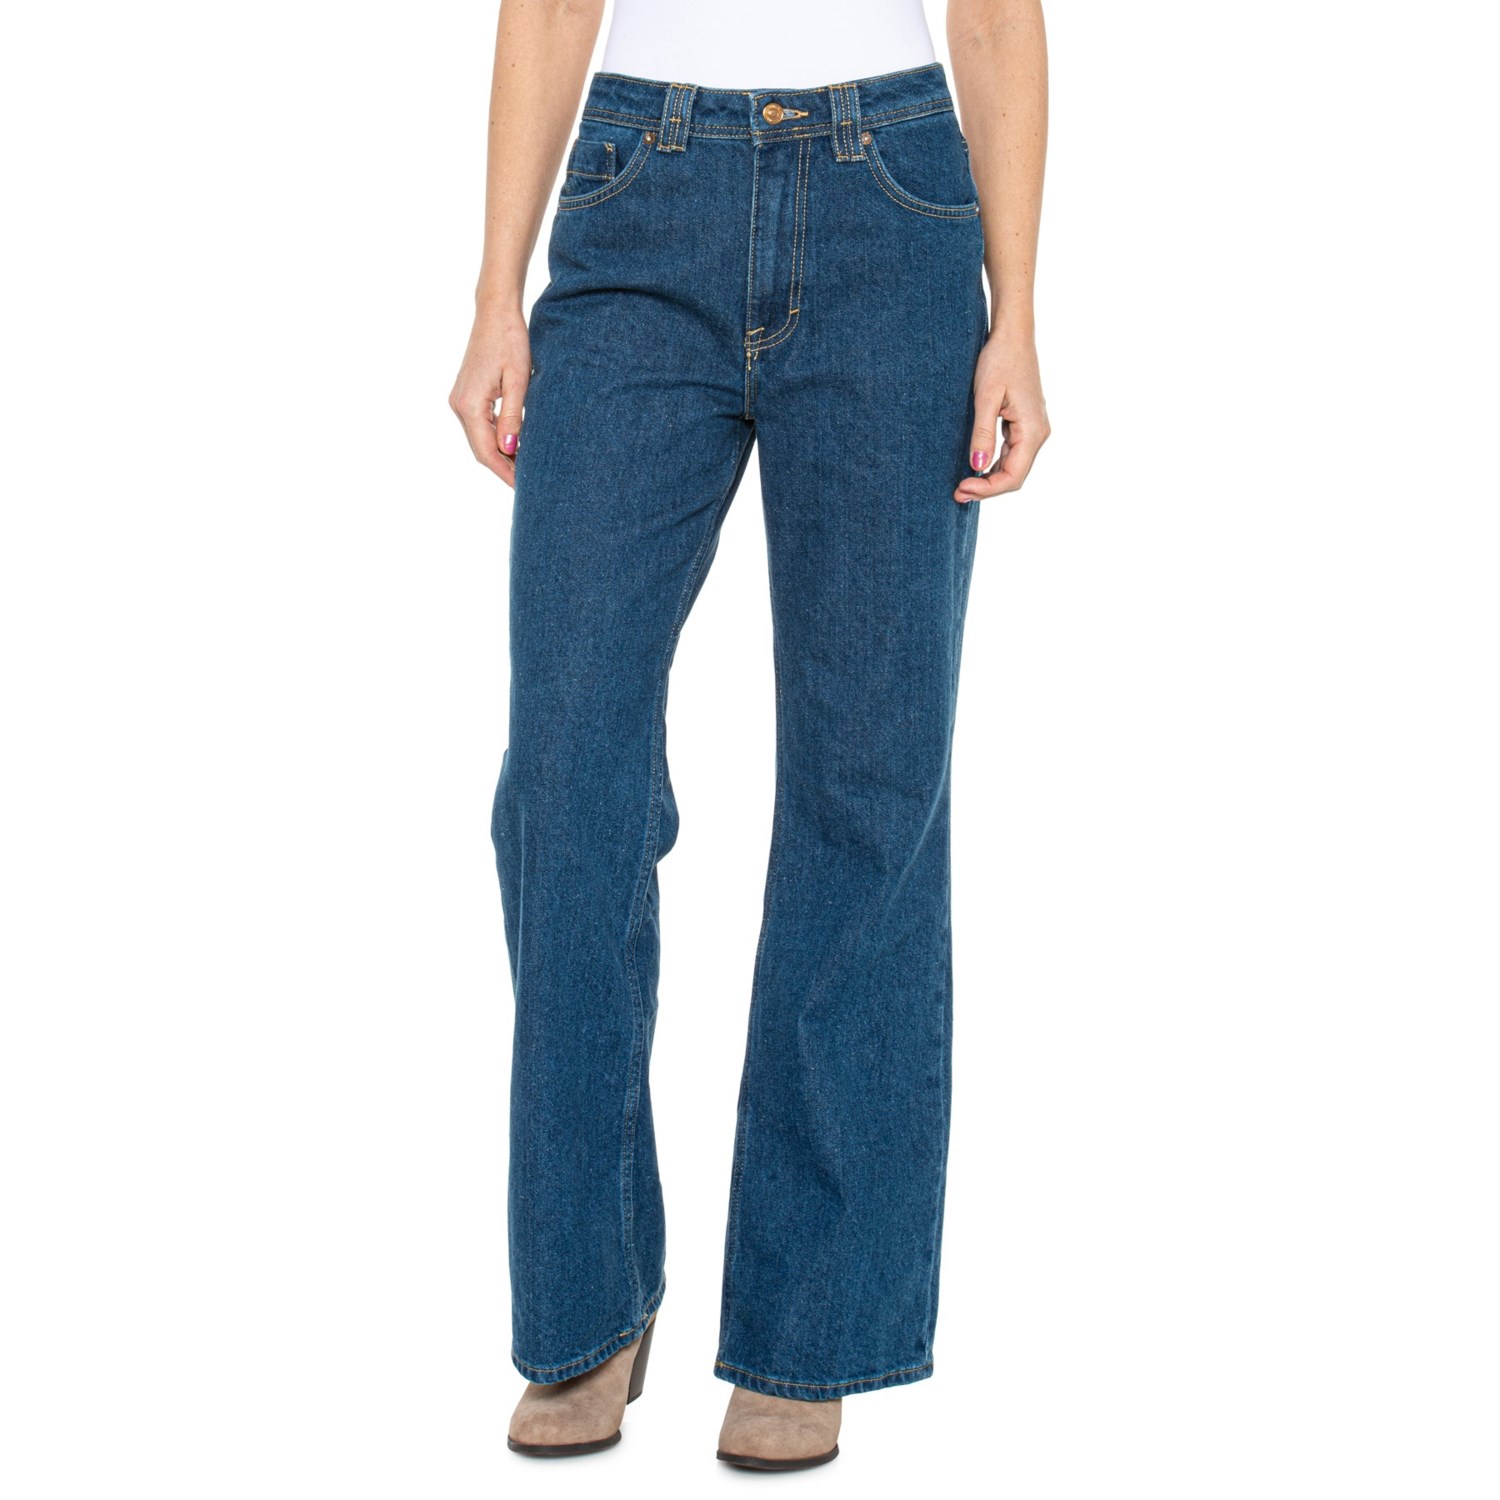 Free People Ava Jeans - High Rise, Bootcut (For Women)